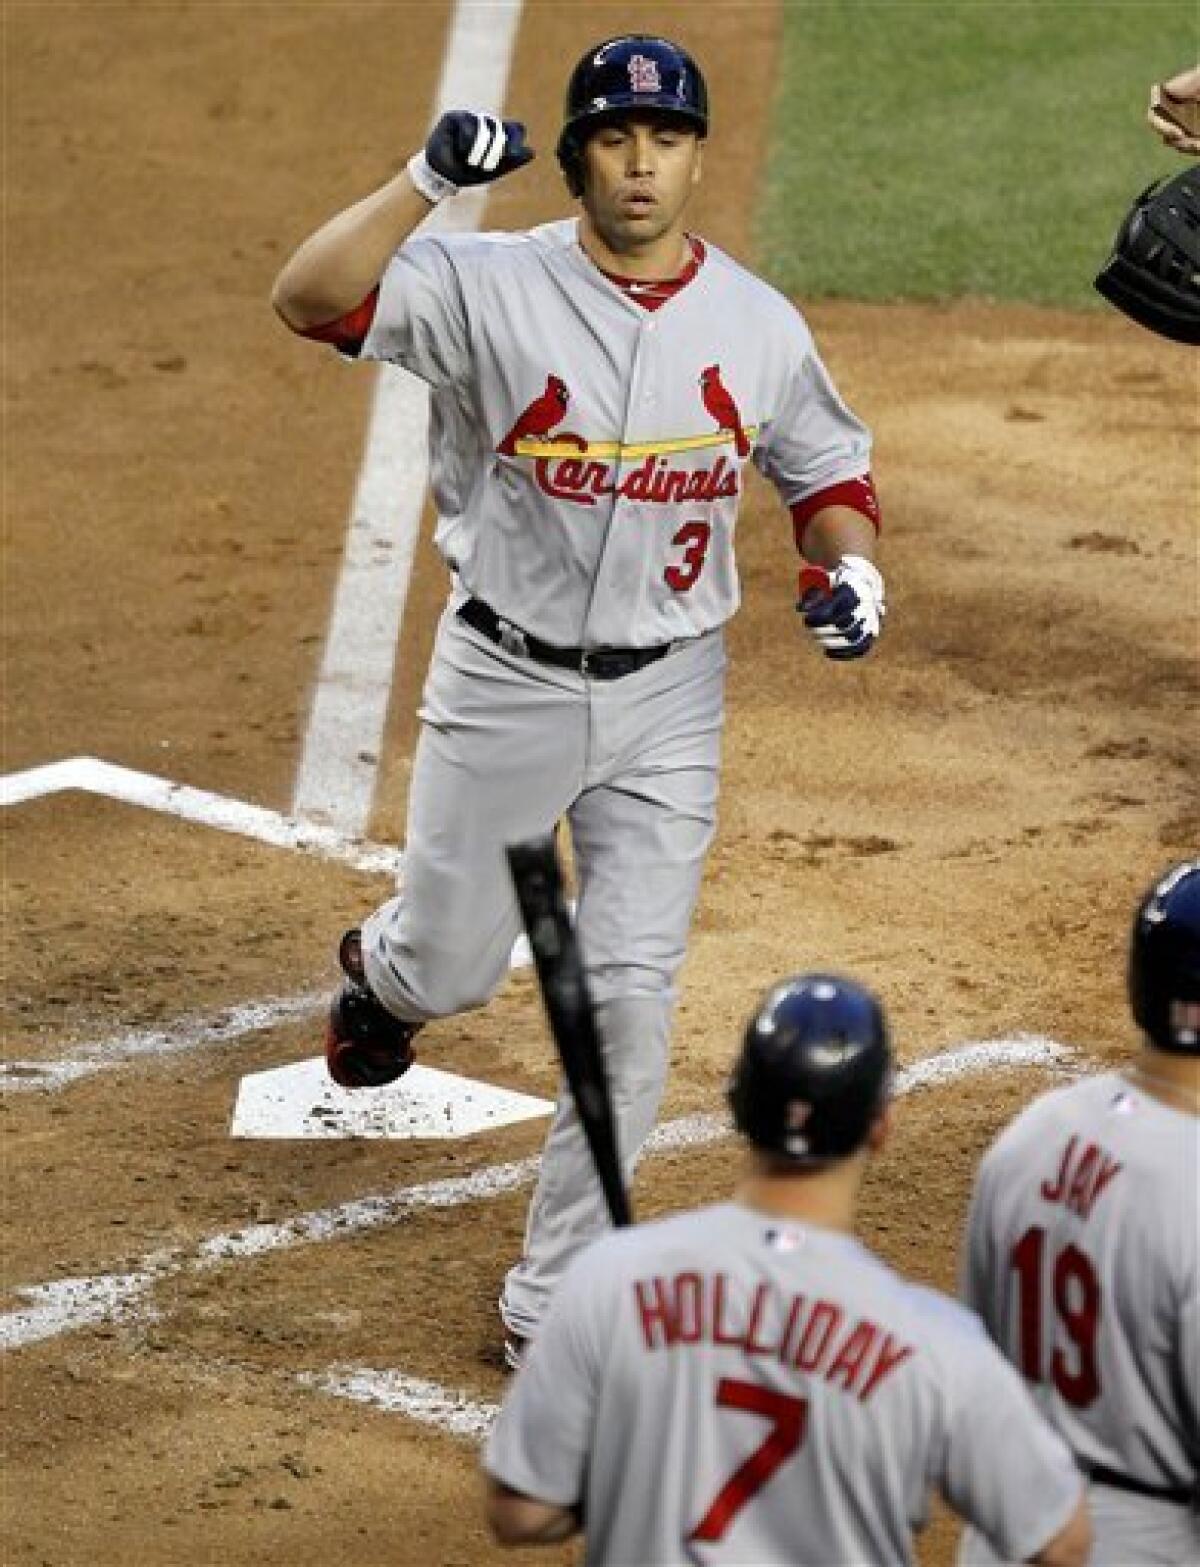 Another Game 7 Opportunity for Cardinals' Carlos Beltran - The New